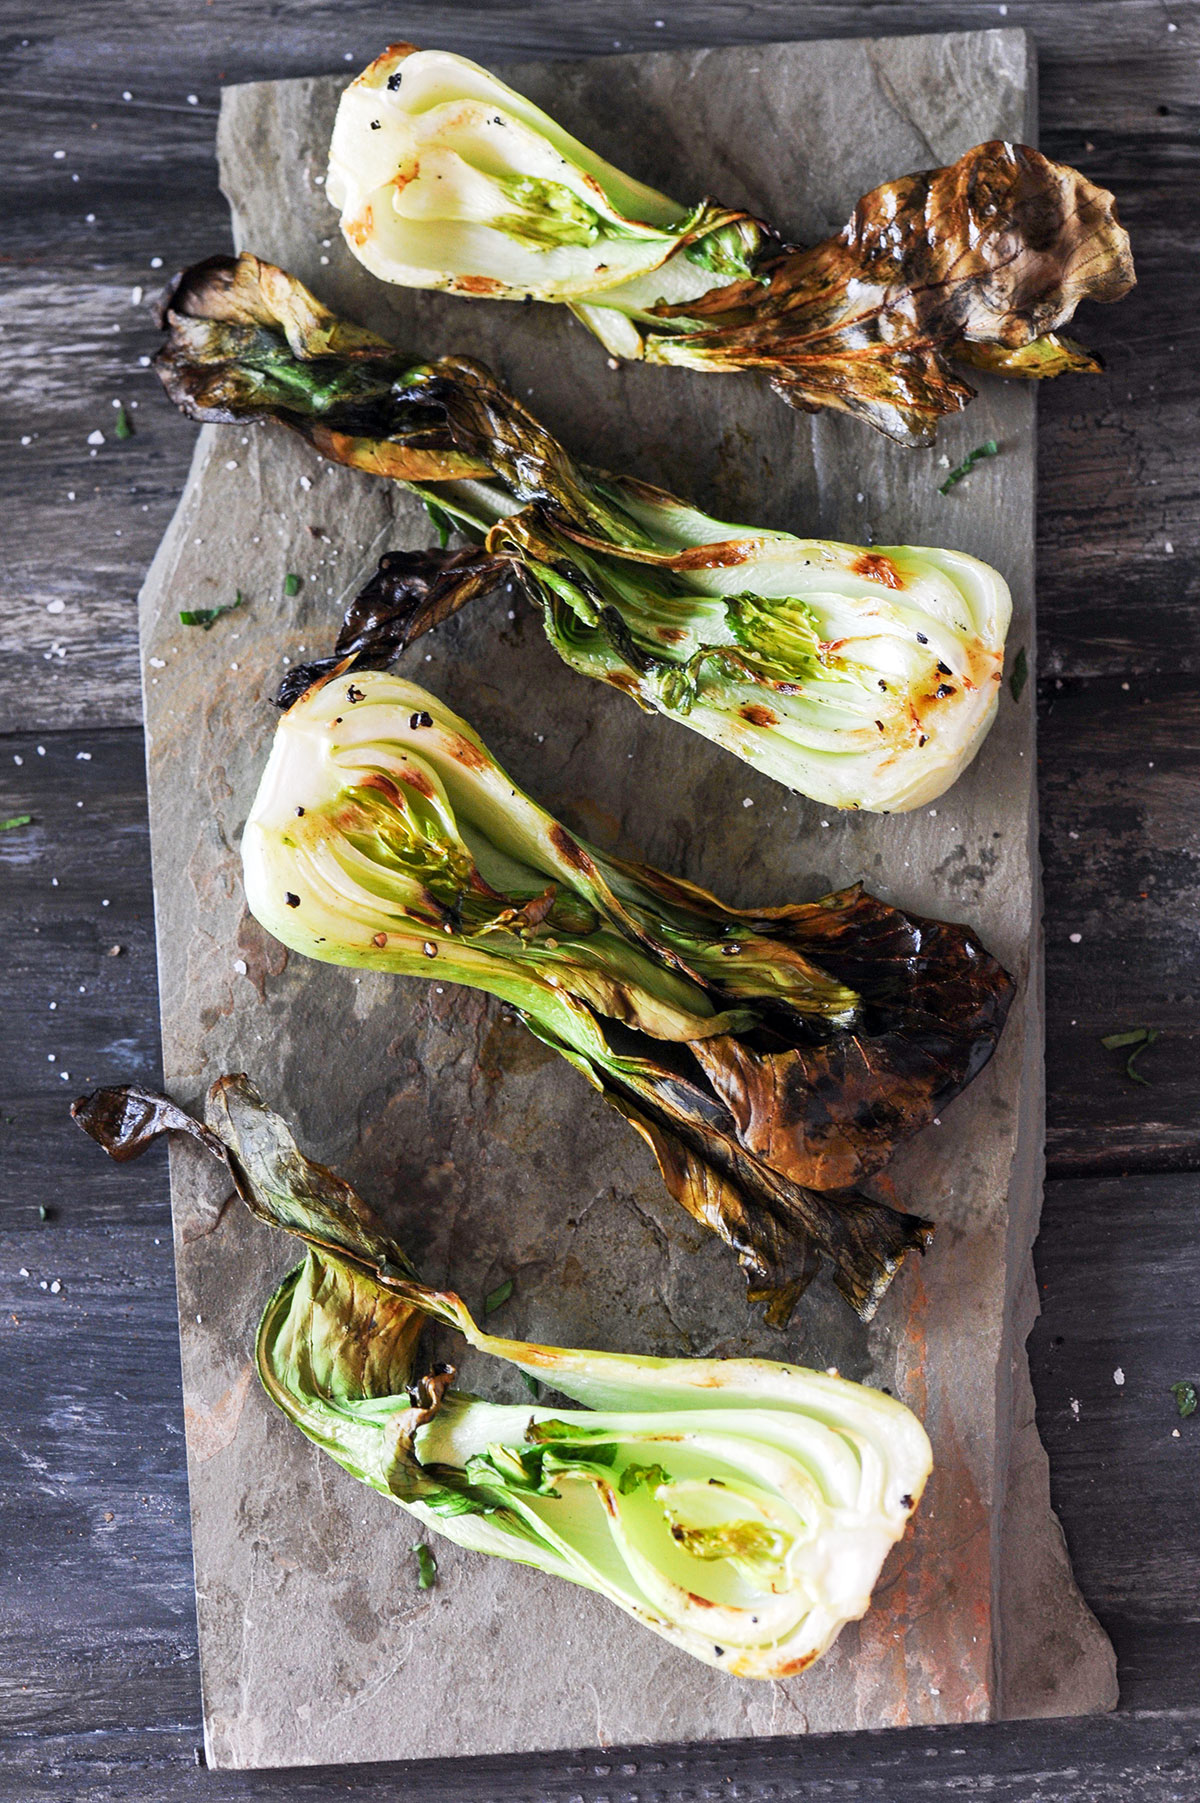 4 halves of grilled baby bok choy on slate. 